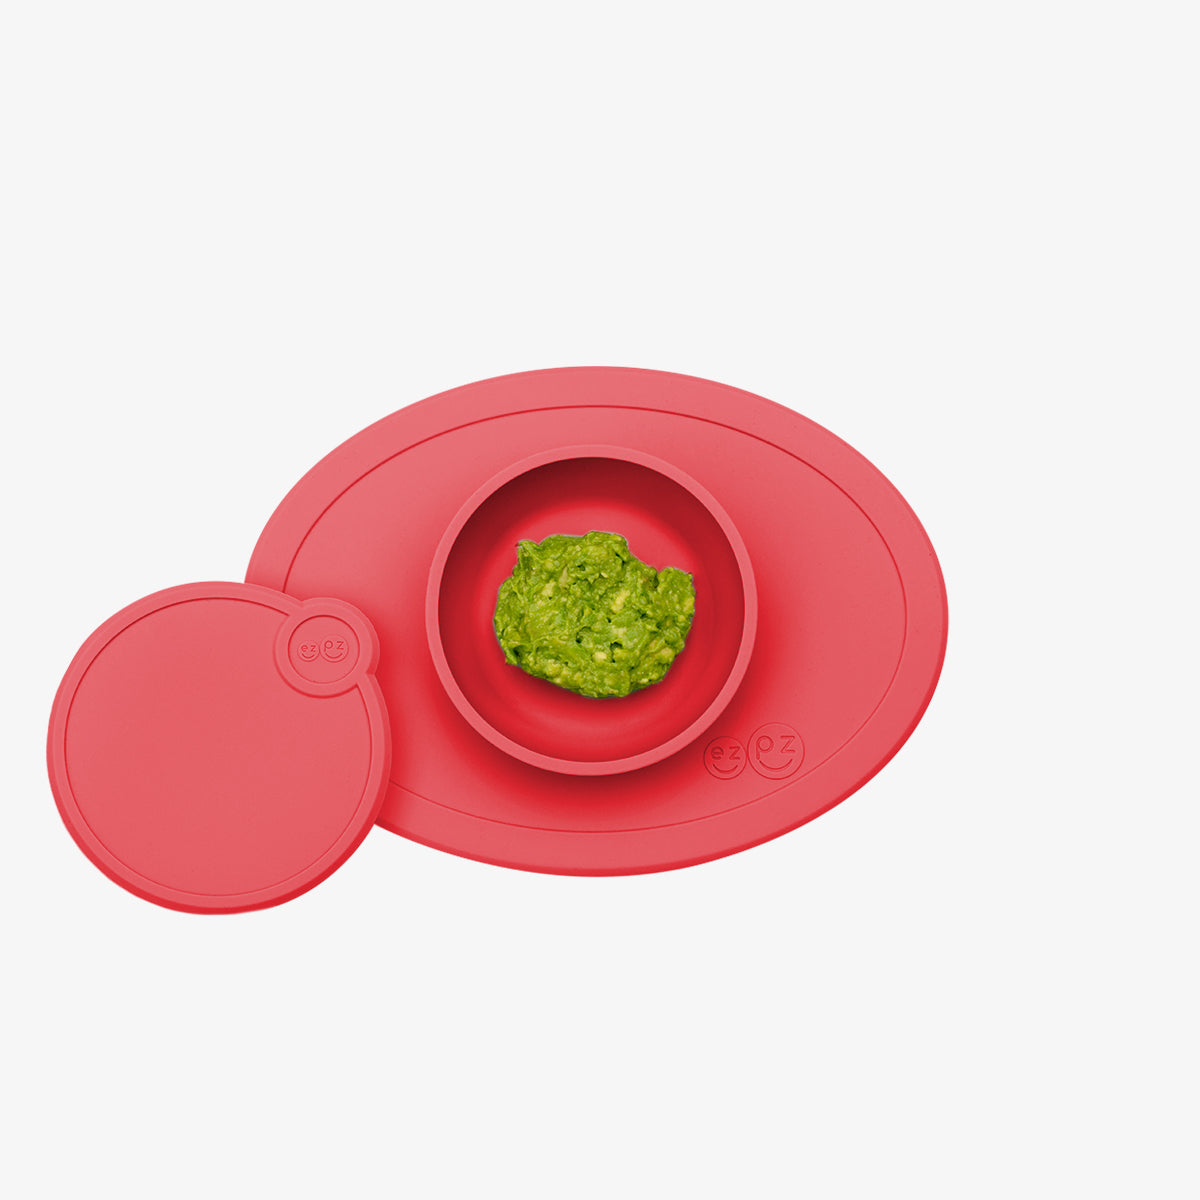 Tiny Bowl Lid in Coral / Storage Lids for the Tiny Bowl by ezpz / Silicone Lid for Baby Bowl